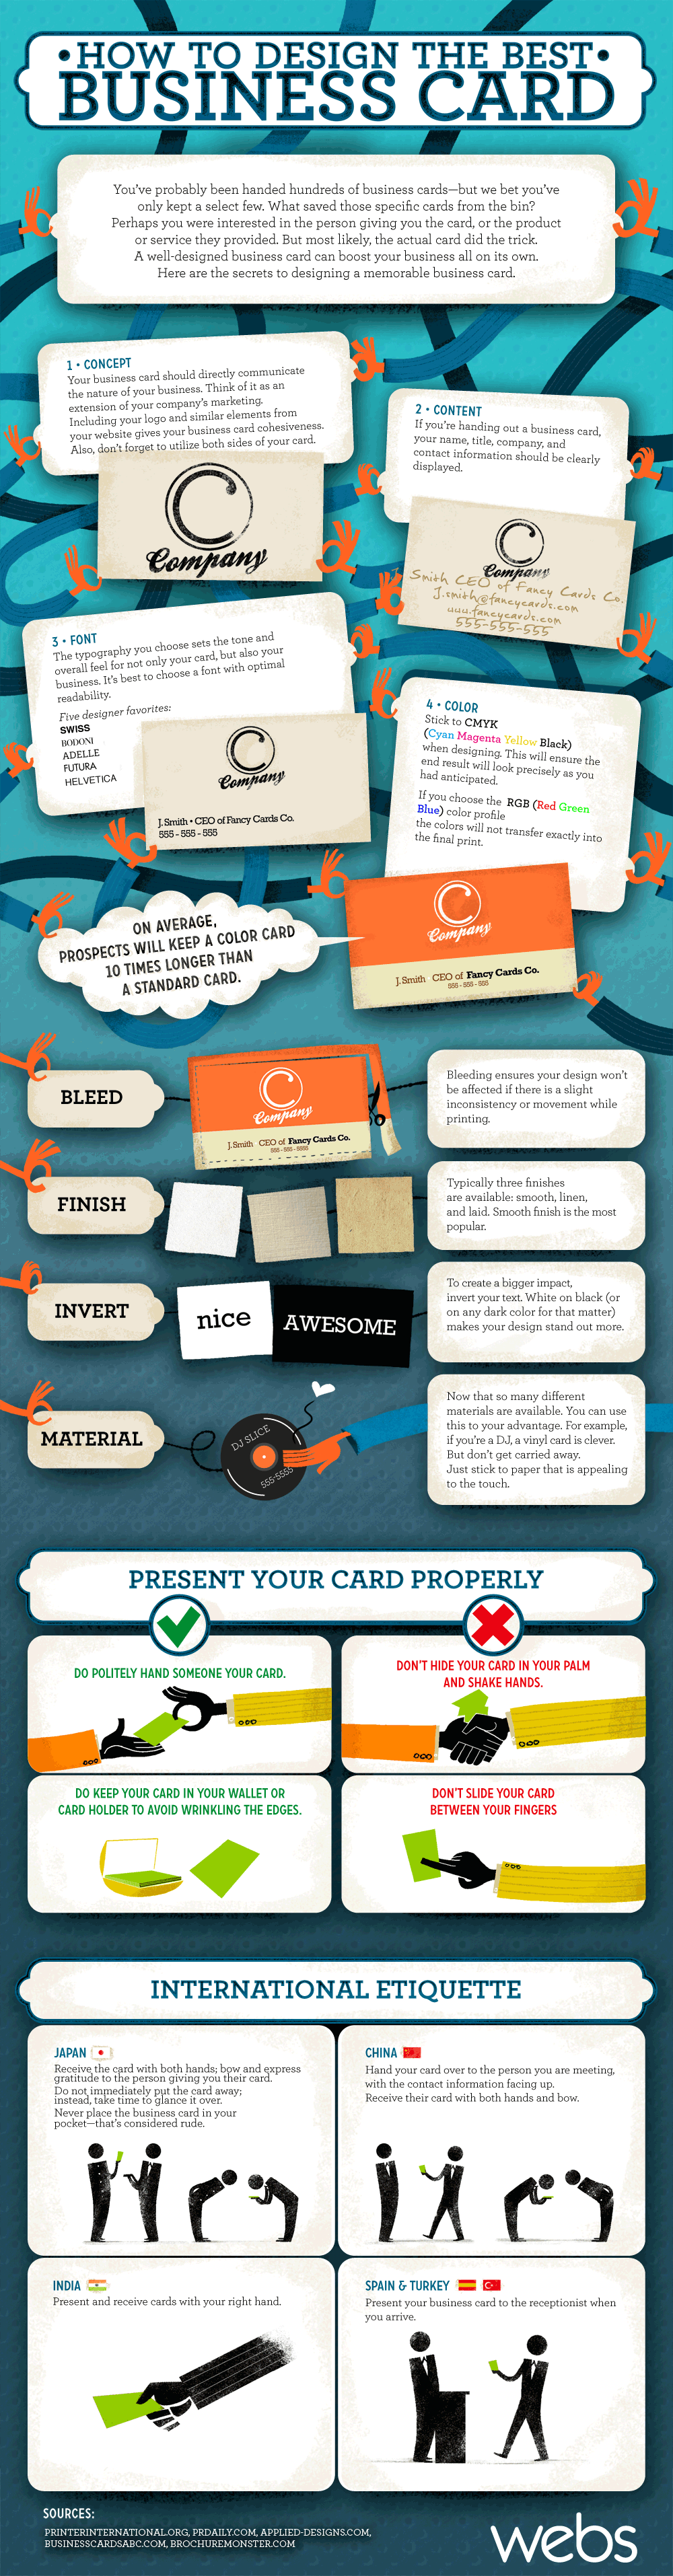 Ultimate Guide To Business Cards [INFOGRAPHIC]  Infographic List